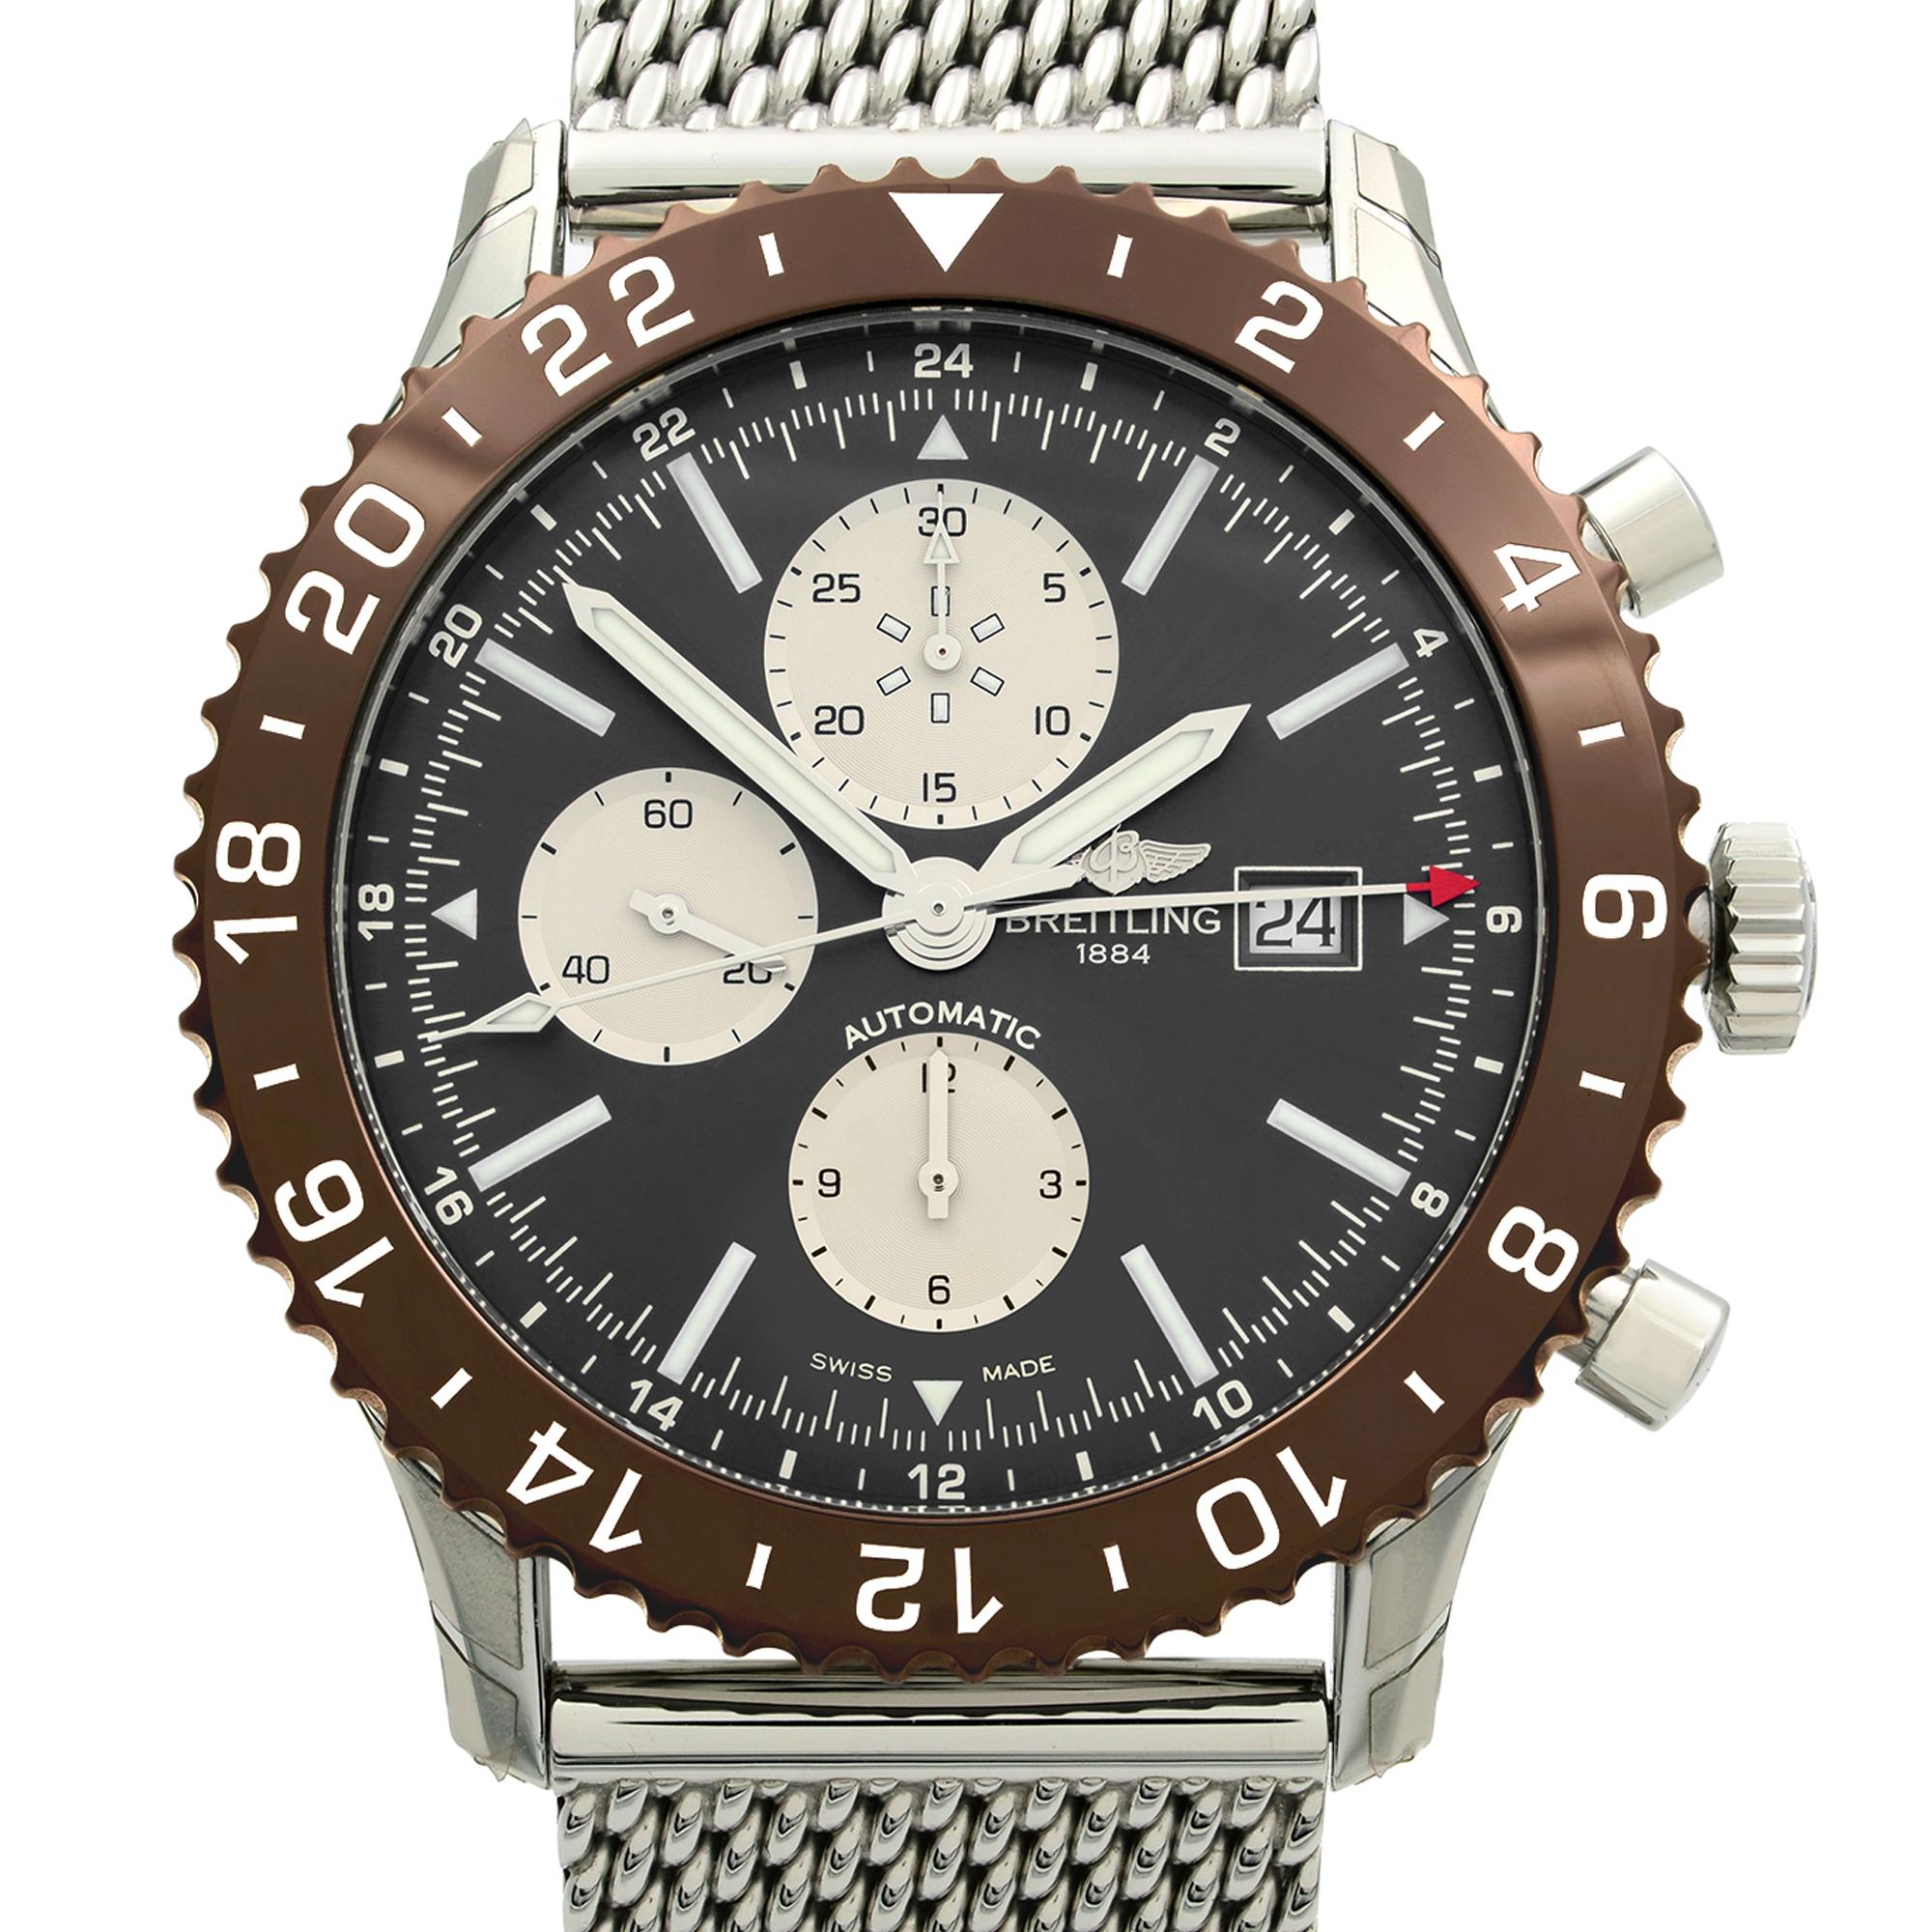 Never Worn.  Original Box and Papers are included Covered by a Three-year Chronostore warranty. It ships worldwide with a 30-day hassle-free return.
Details:
MSRP 7575
Brand Breitling
Model Number Y2431033/Q621-152A
Model Breitling